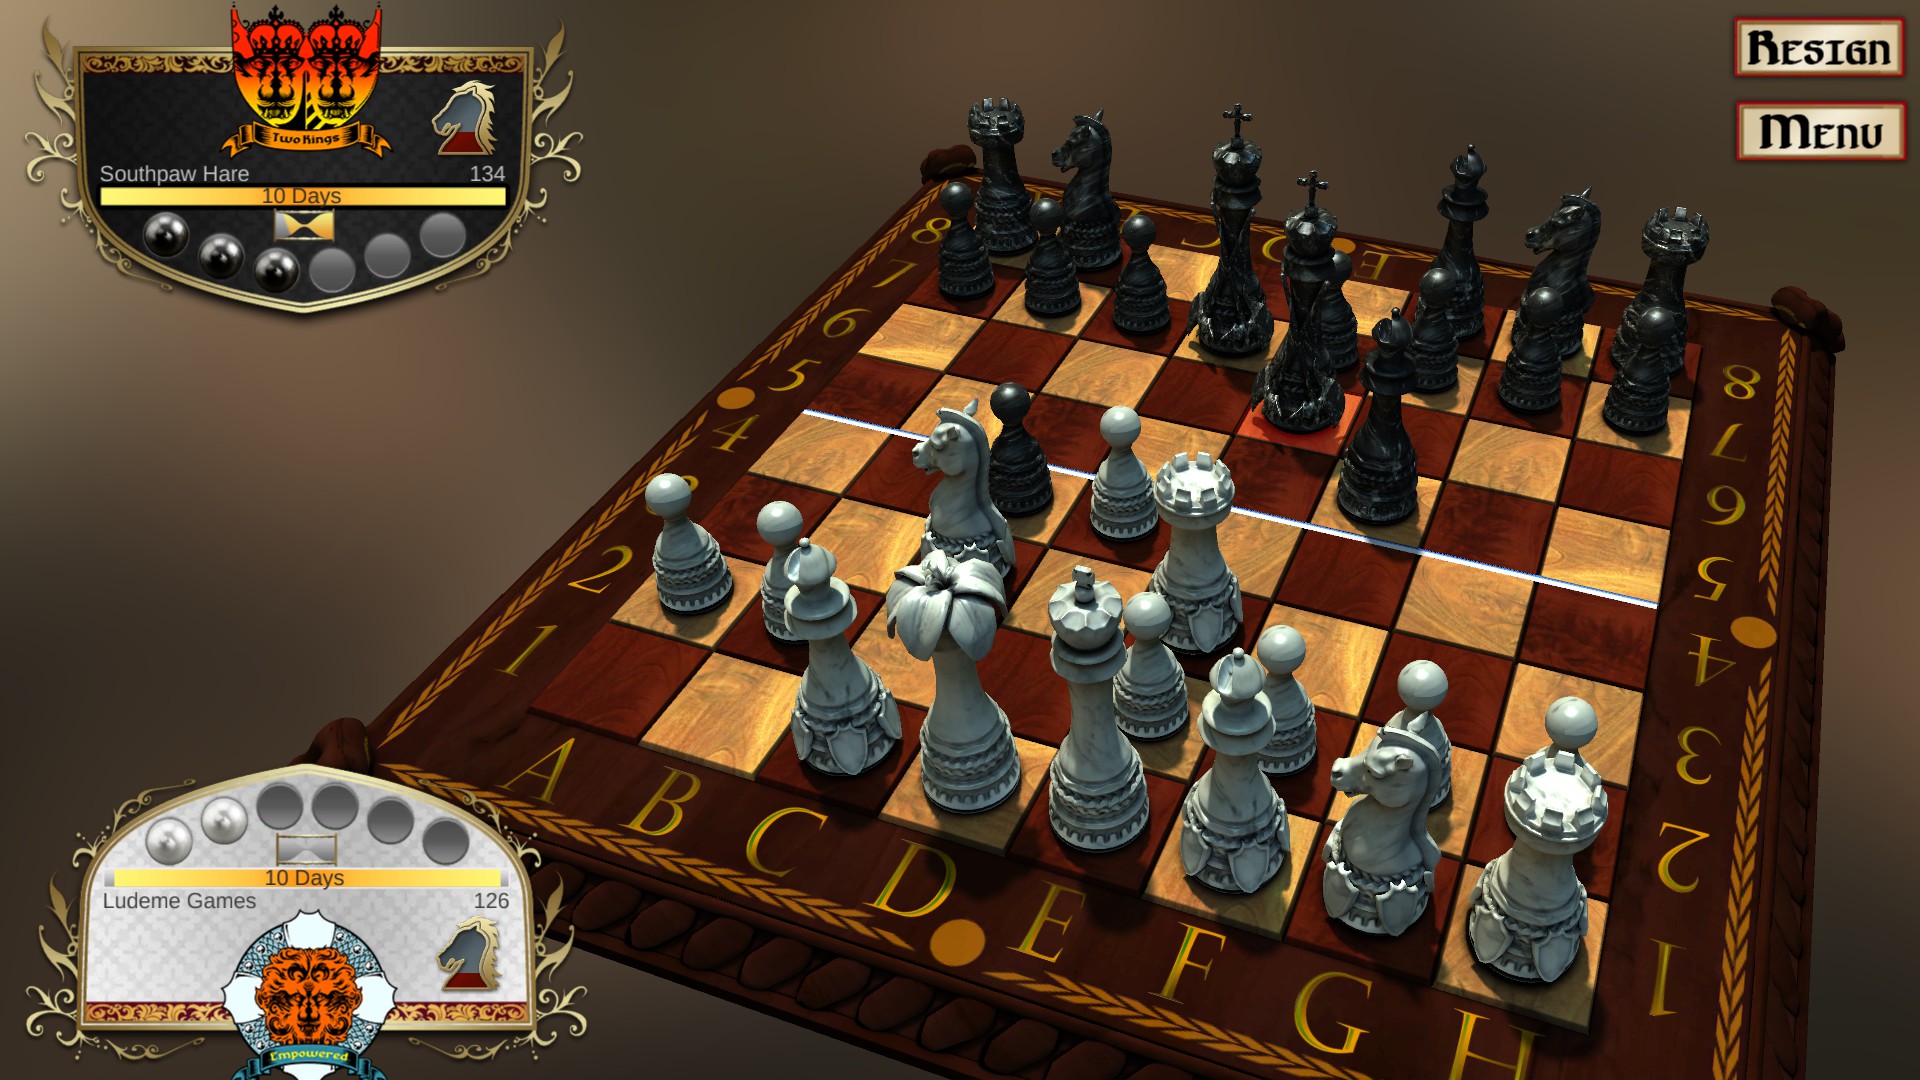 download game love chess 2